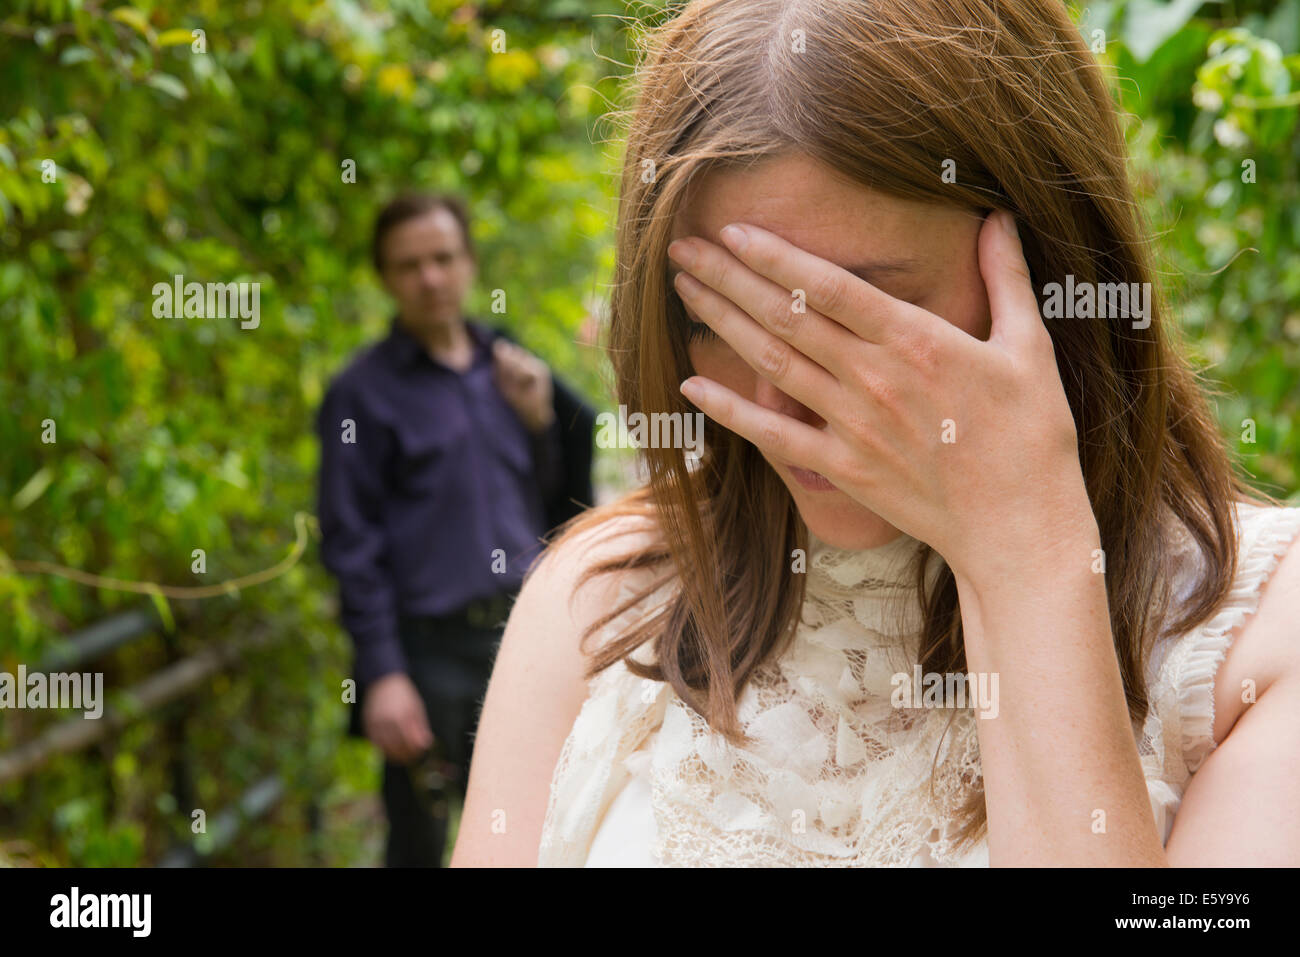 Tearful woman with hand on her face and man standing in the background. Stock Photo